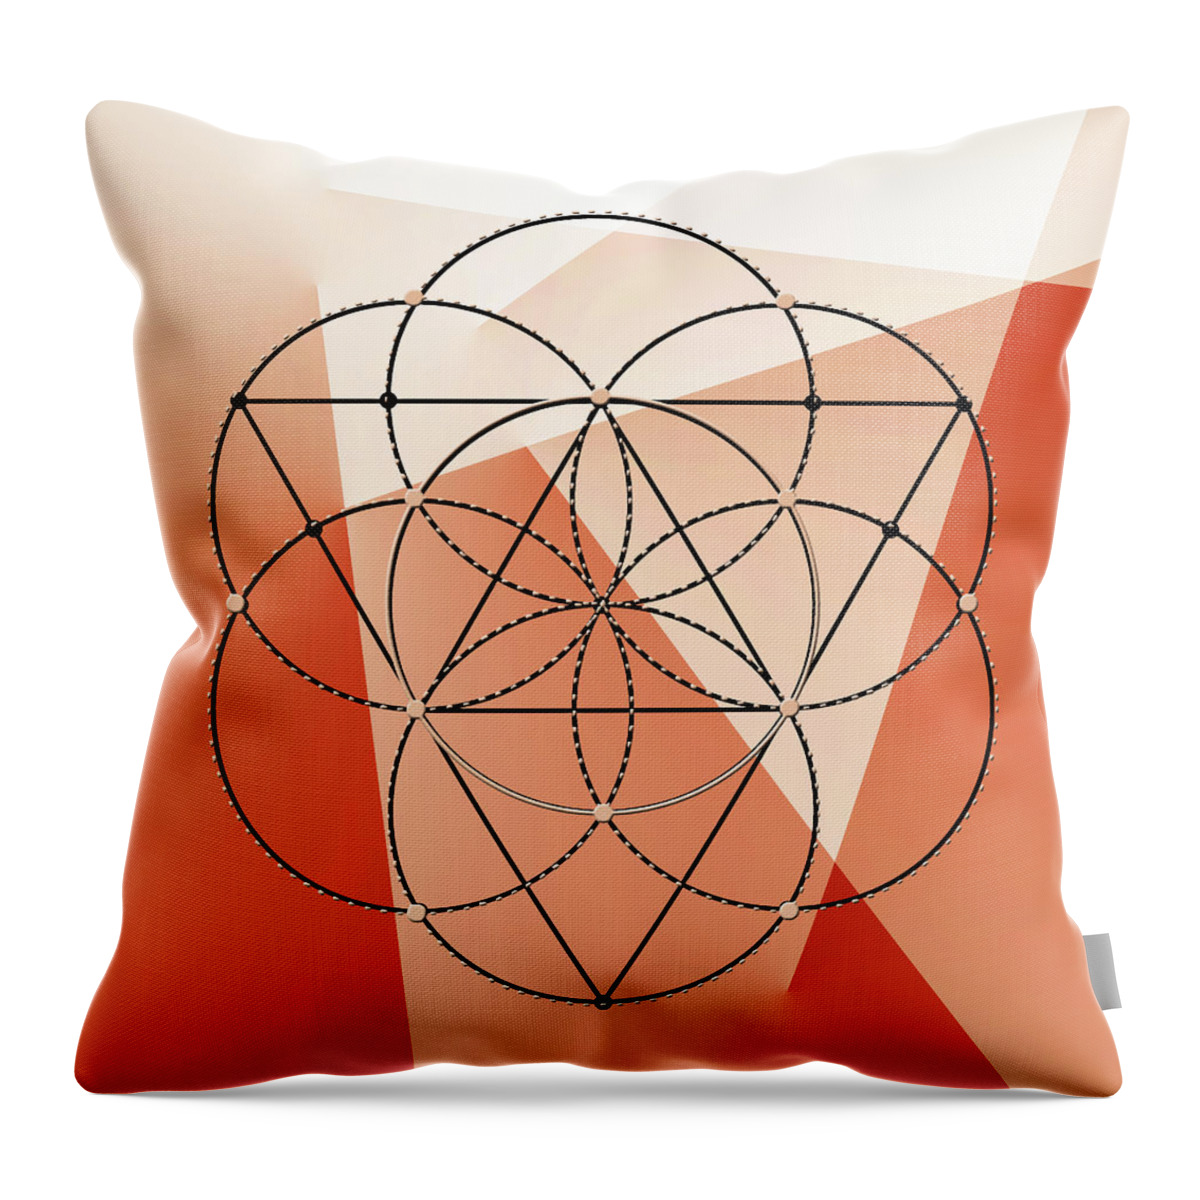 Abstract Throw Pillow featuring the digital art Geometric Abstract 008 by Michelle Whitmore